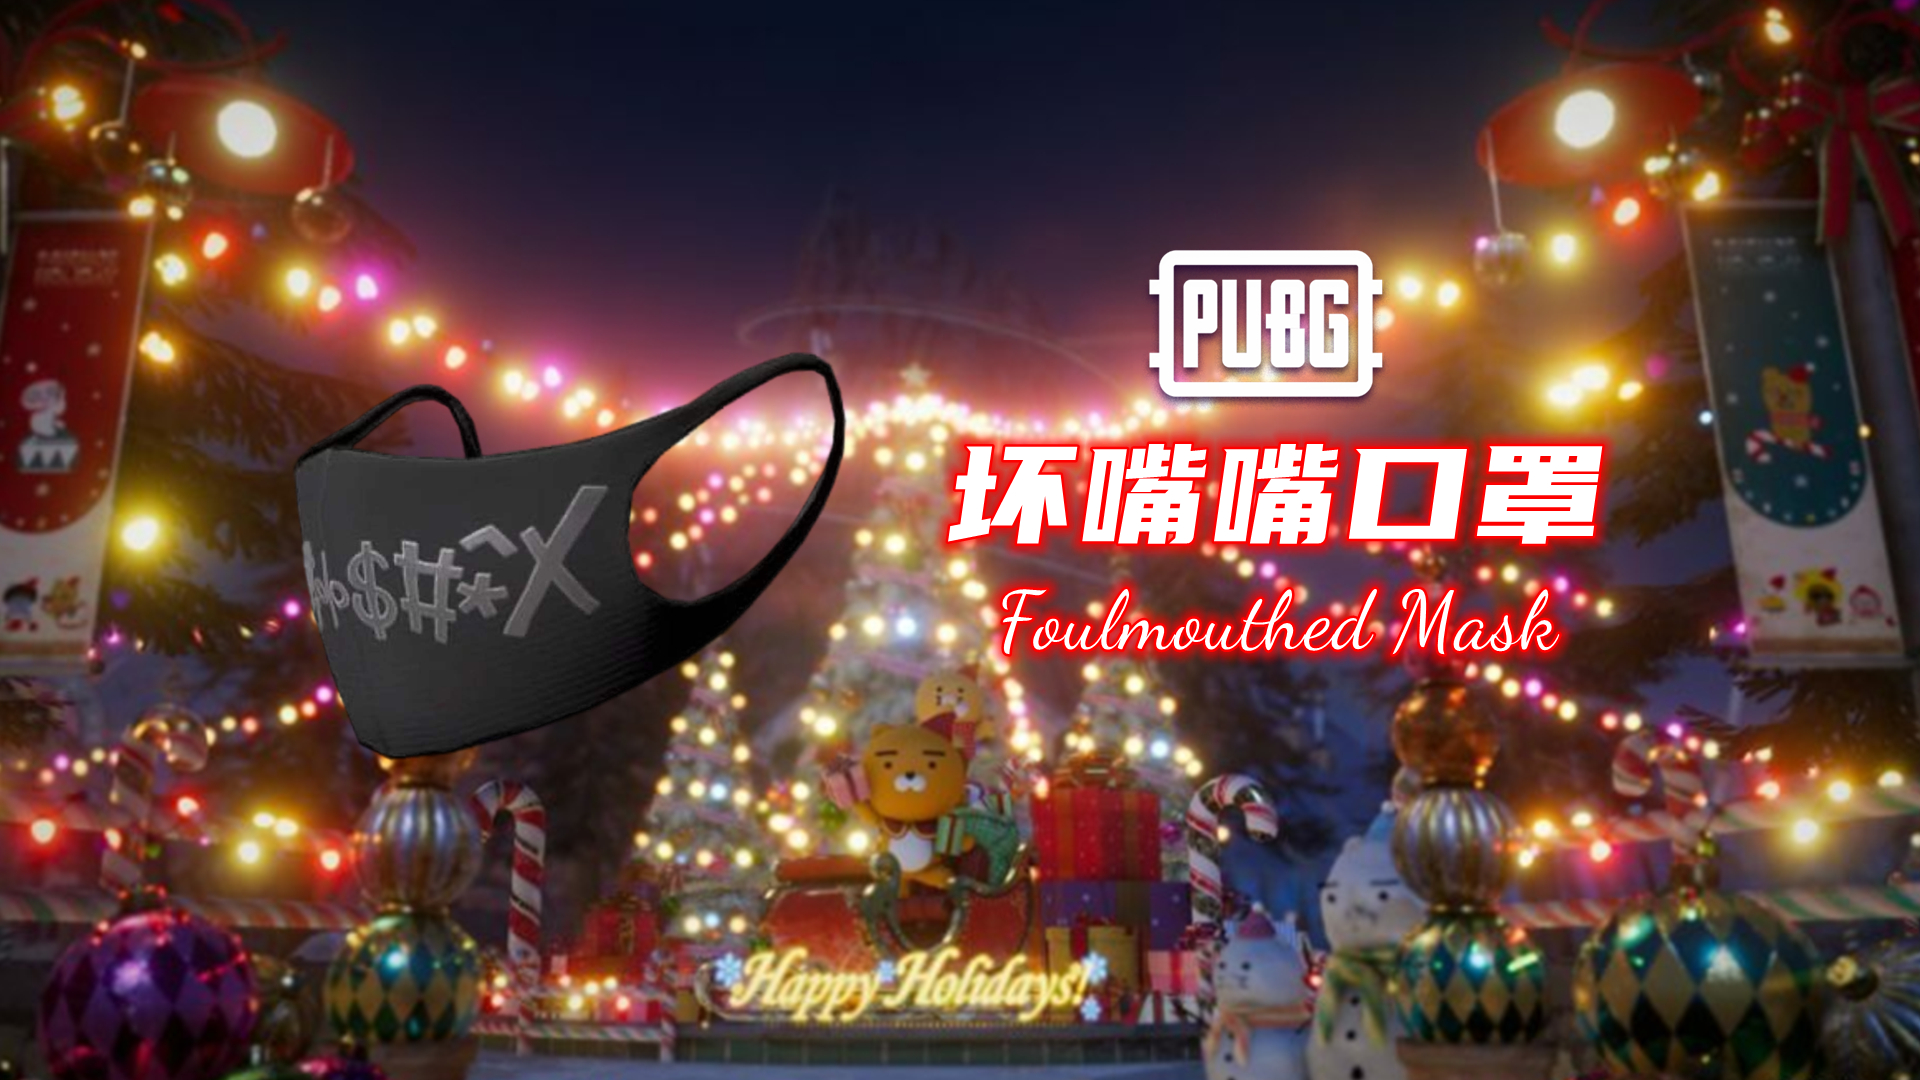 PUBG 坏嘴嘴口罩 Foulmouthed Mask